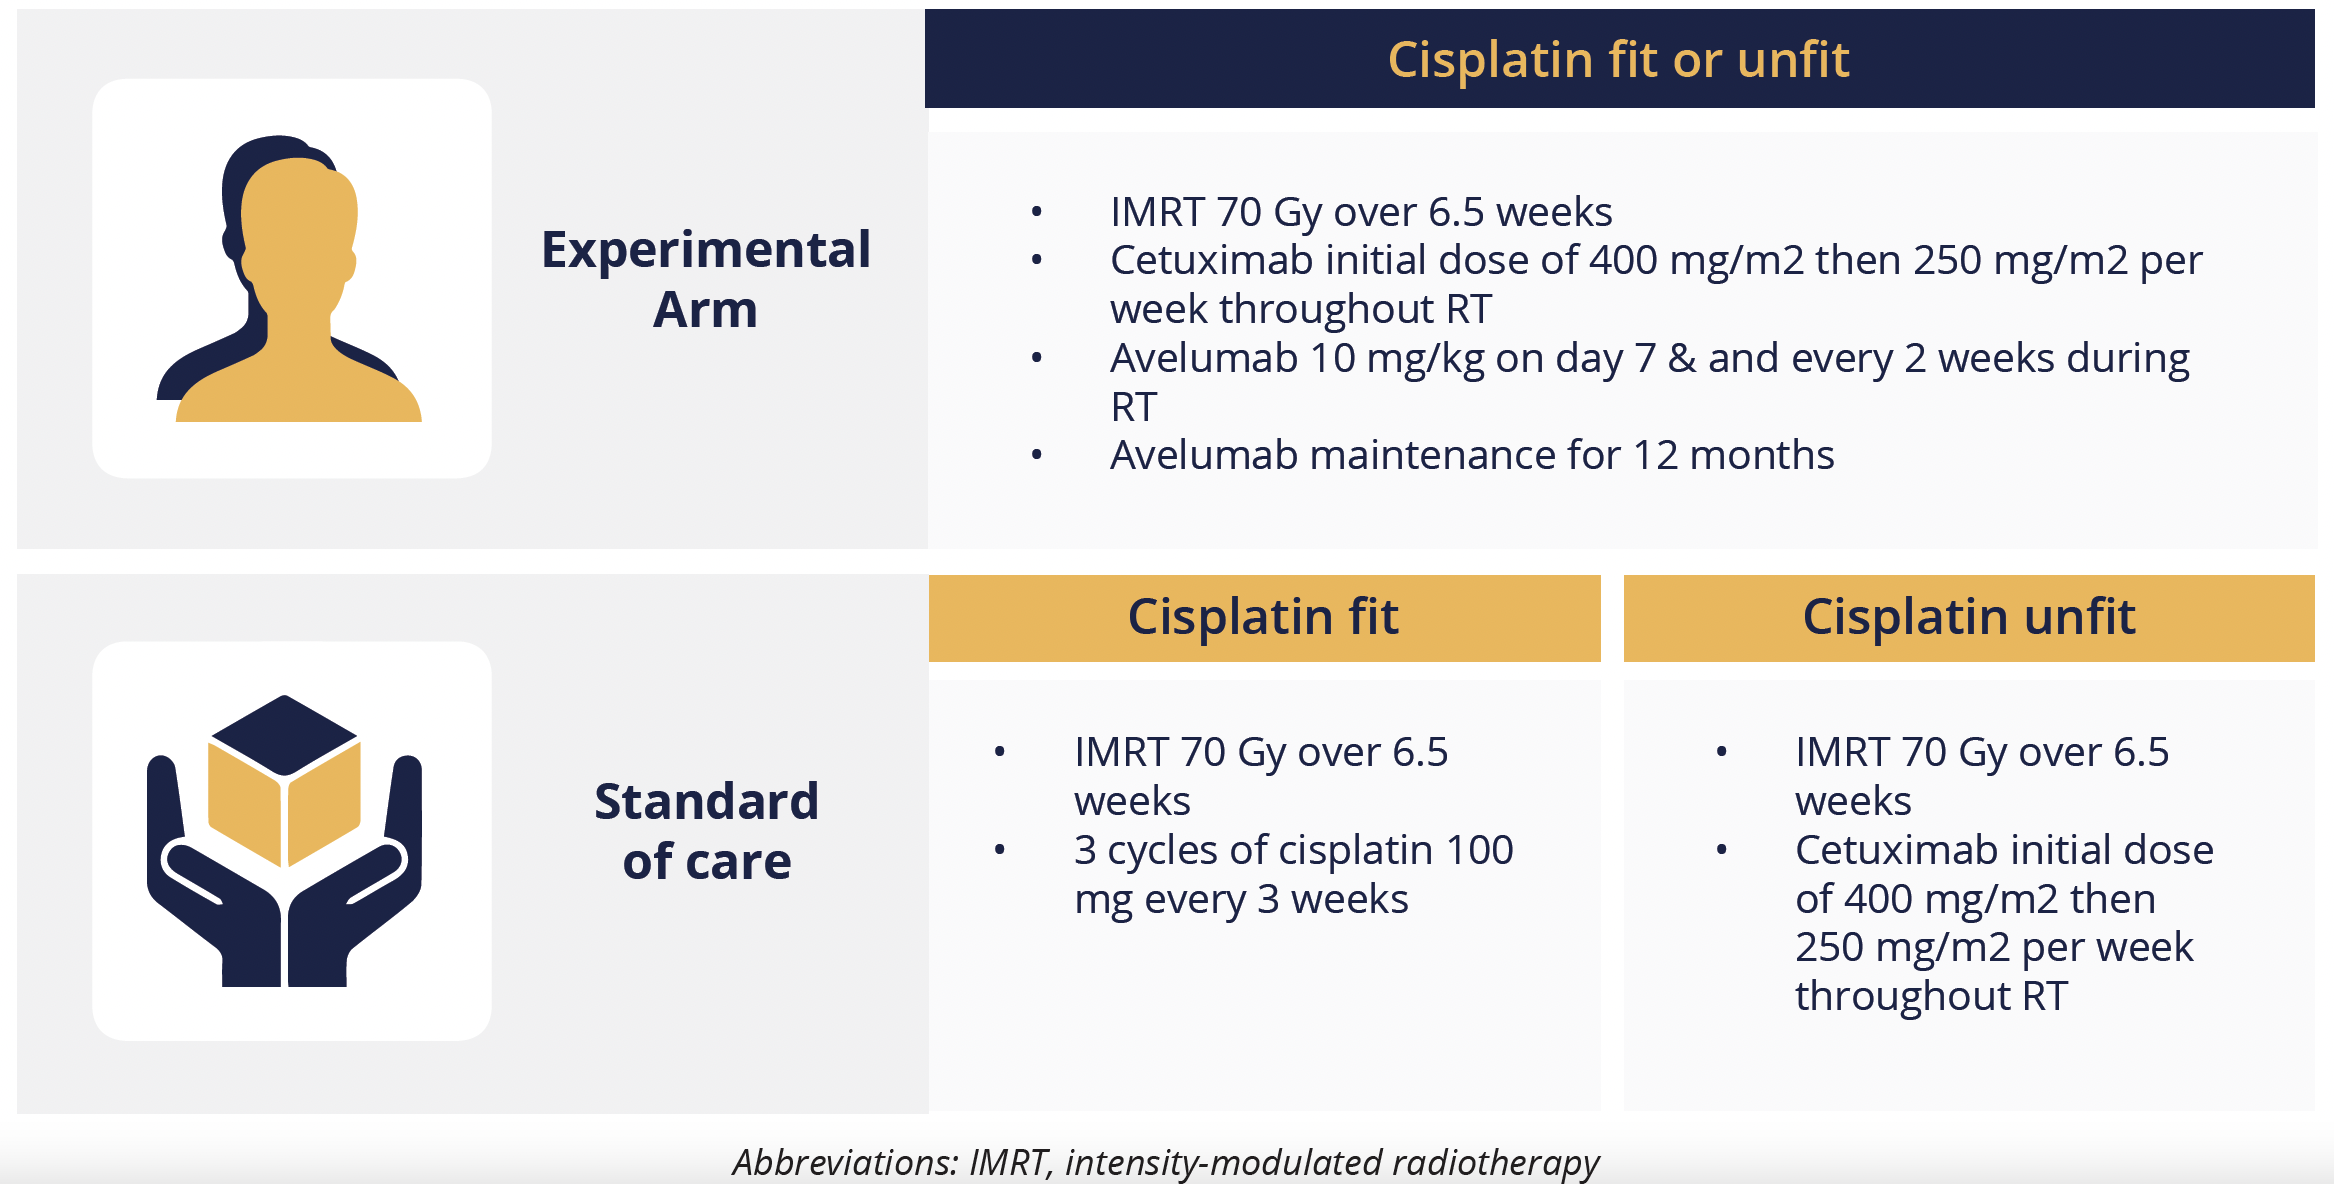 Treatment regimens received for avelumab and cetuximab plus radiotherapy versus standard of care in cisplatin fit and unfit patients with locally advanced SCCHN